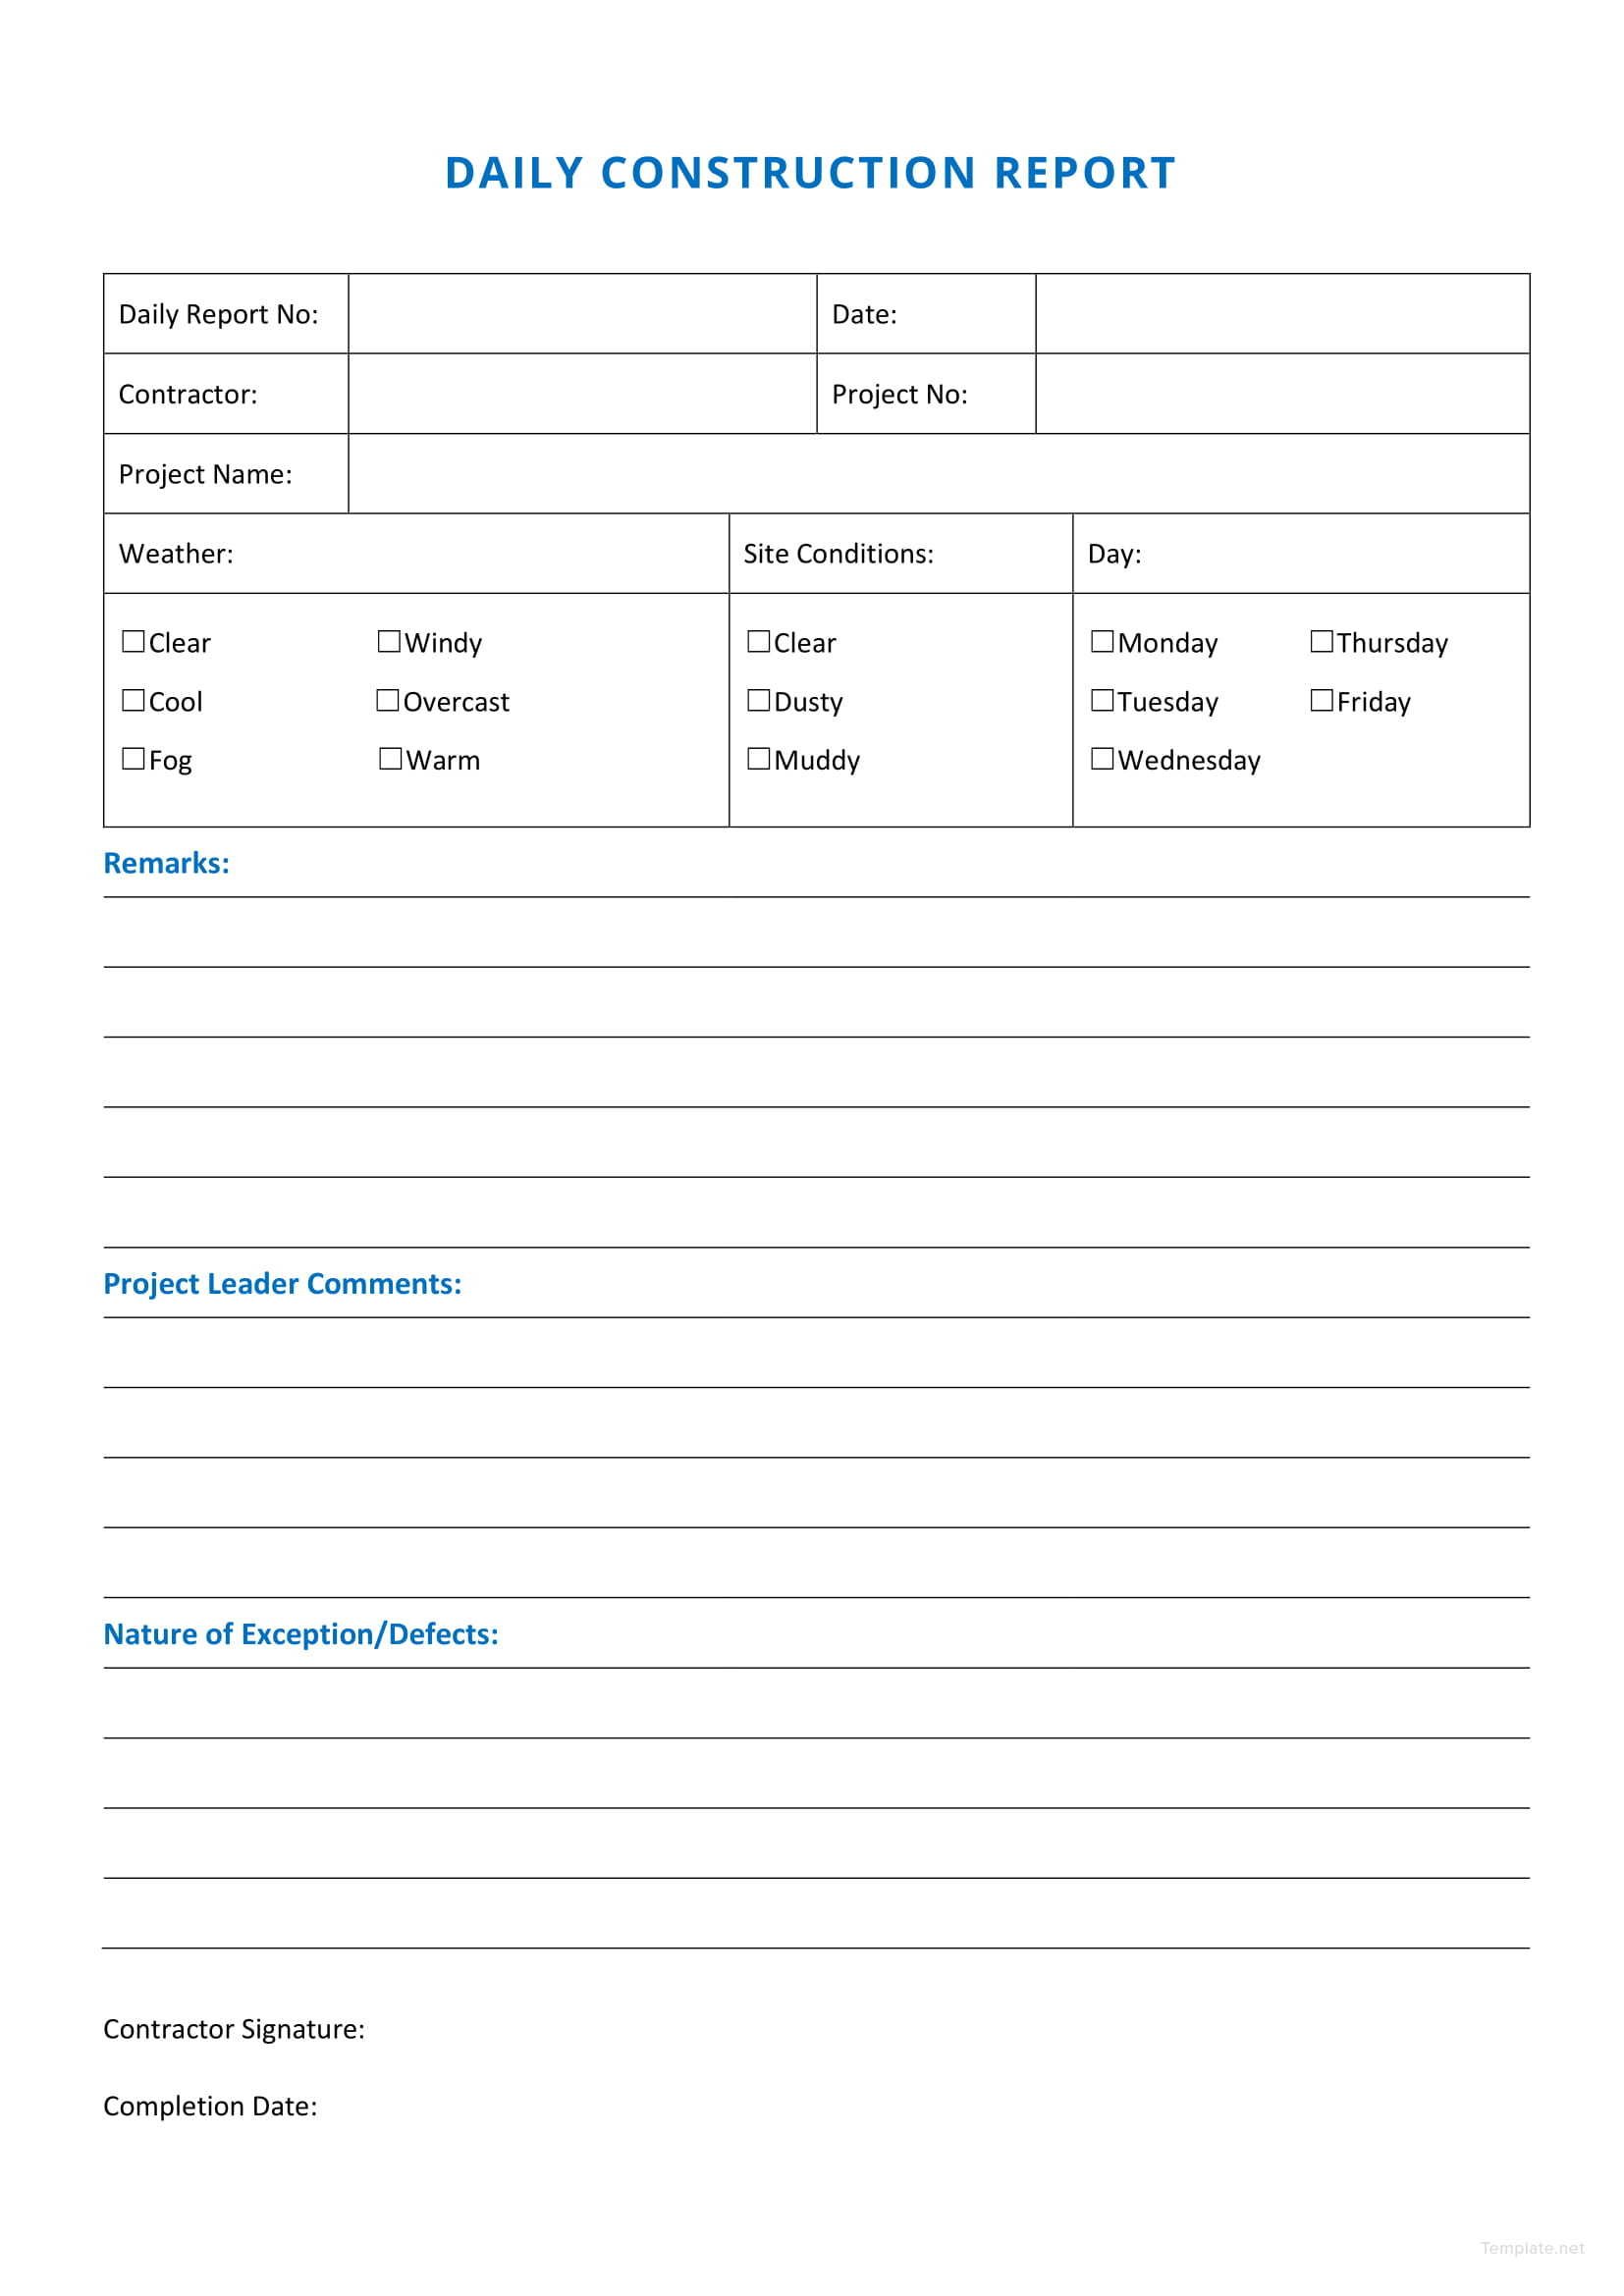 Daily Construction Report Sample Template In Microsoft Word, PDF